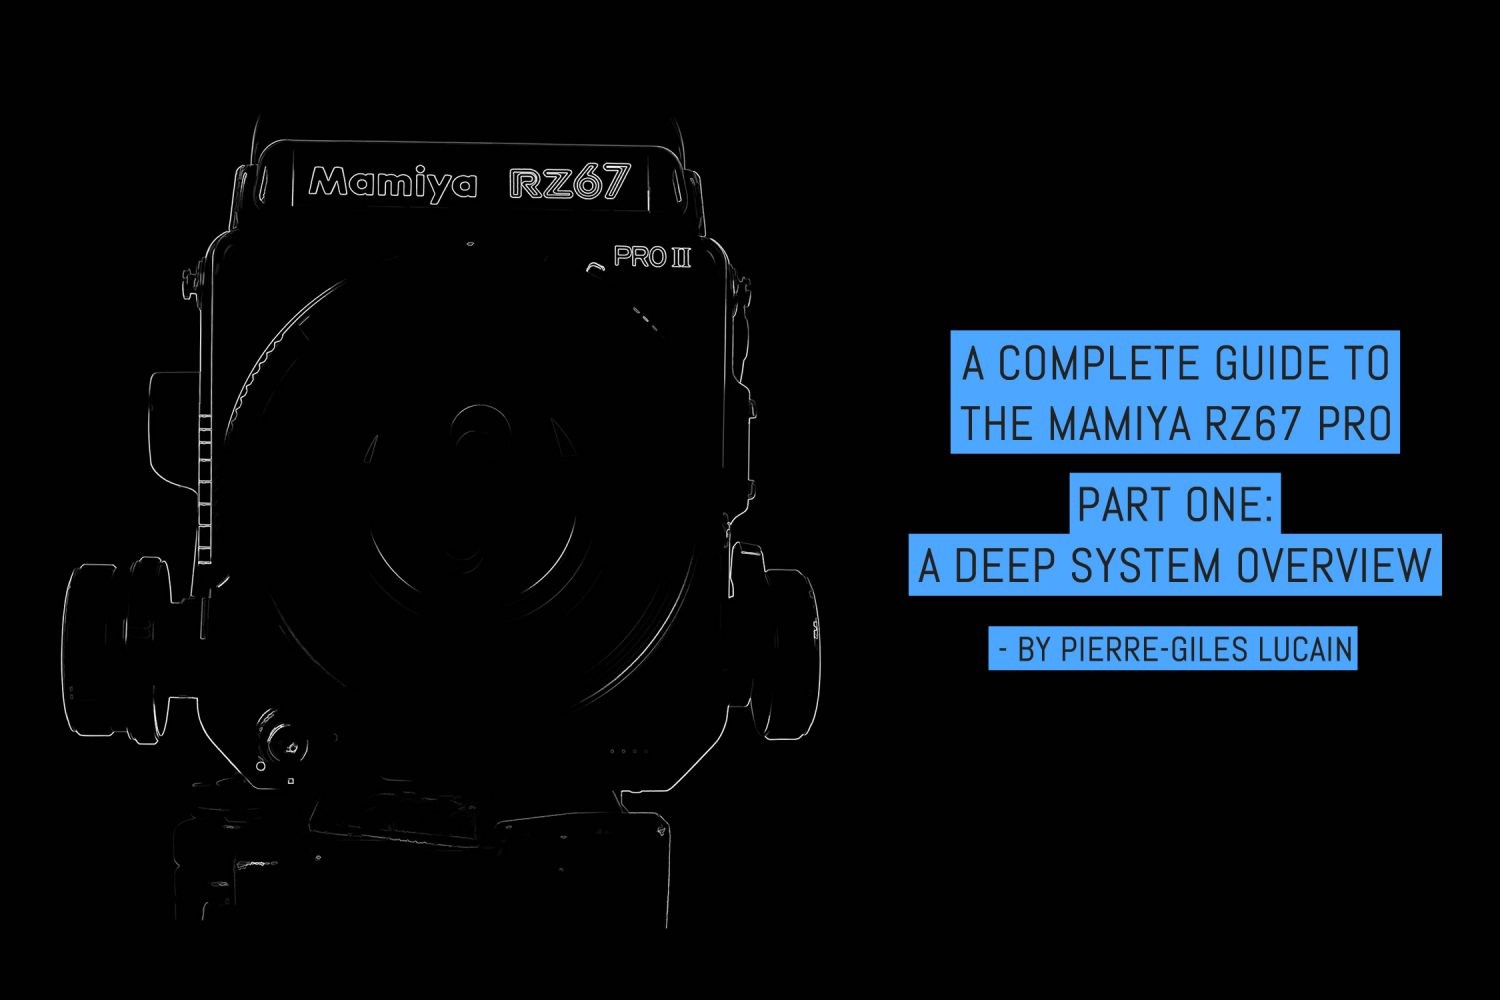 A complete guide to the Mamiya RZ67 Pro: part one - a deep system overview